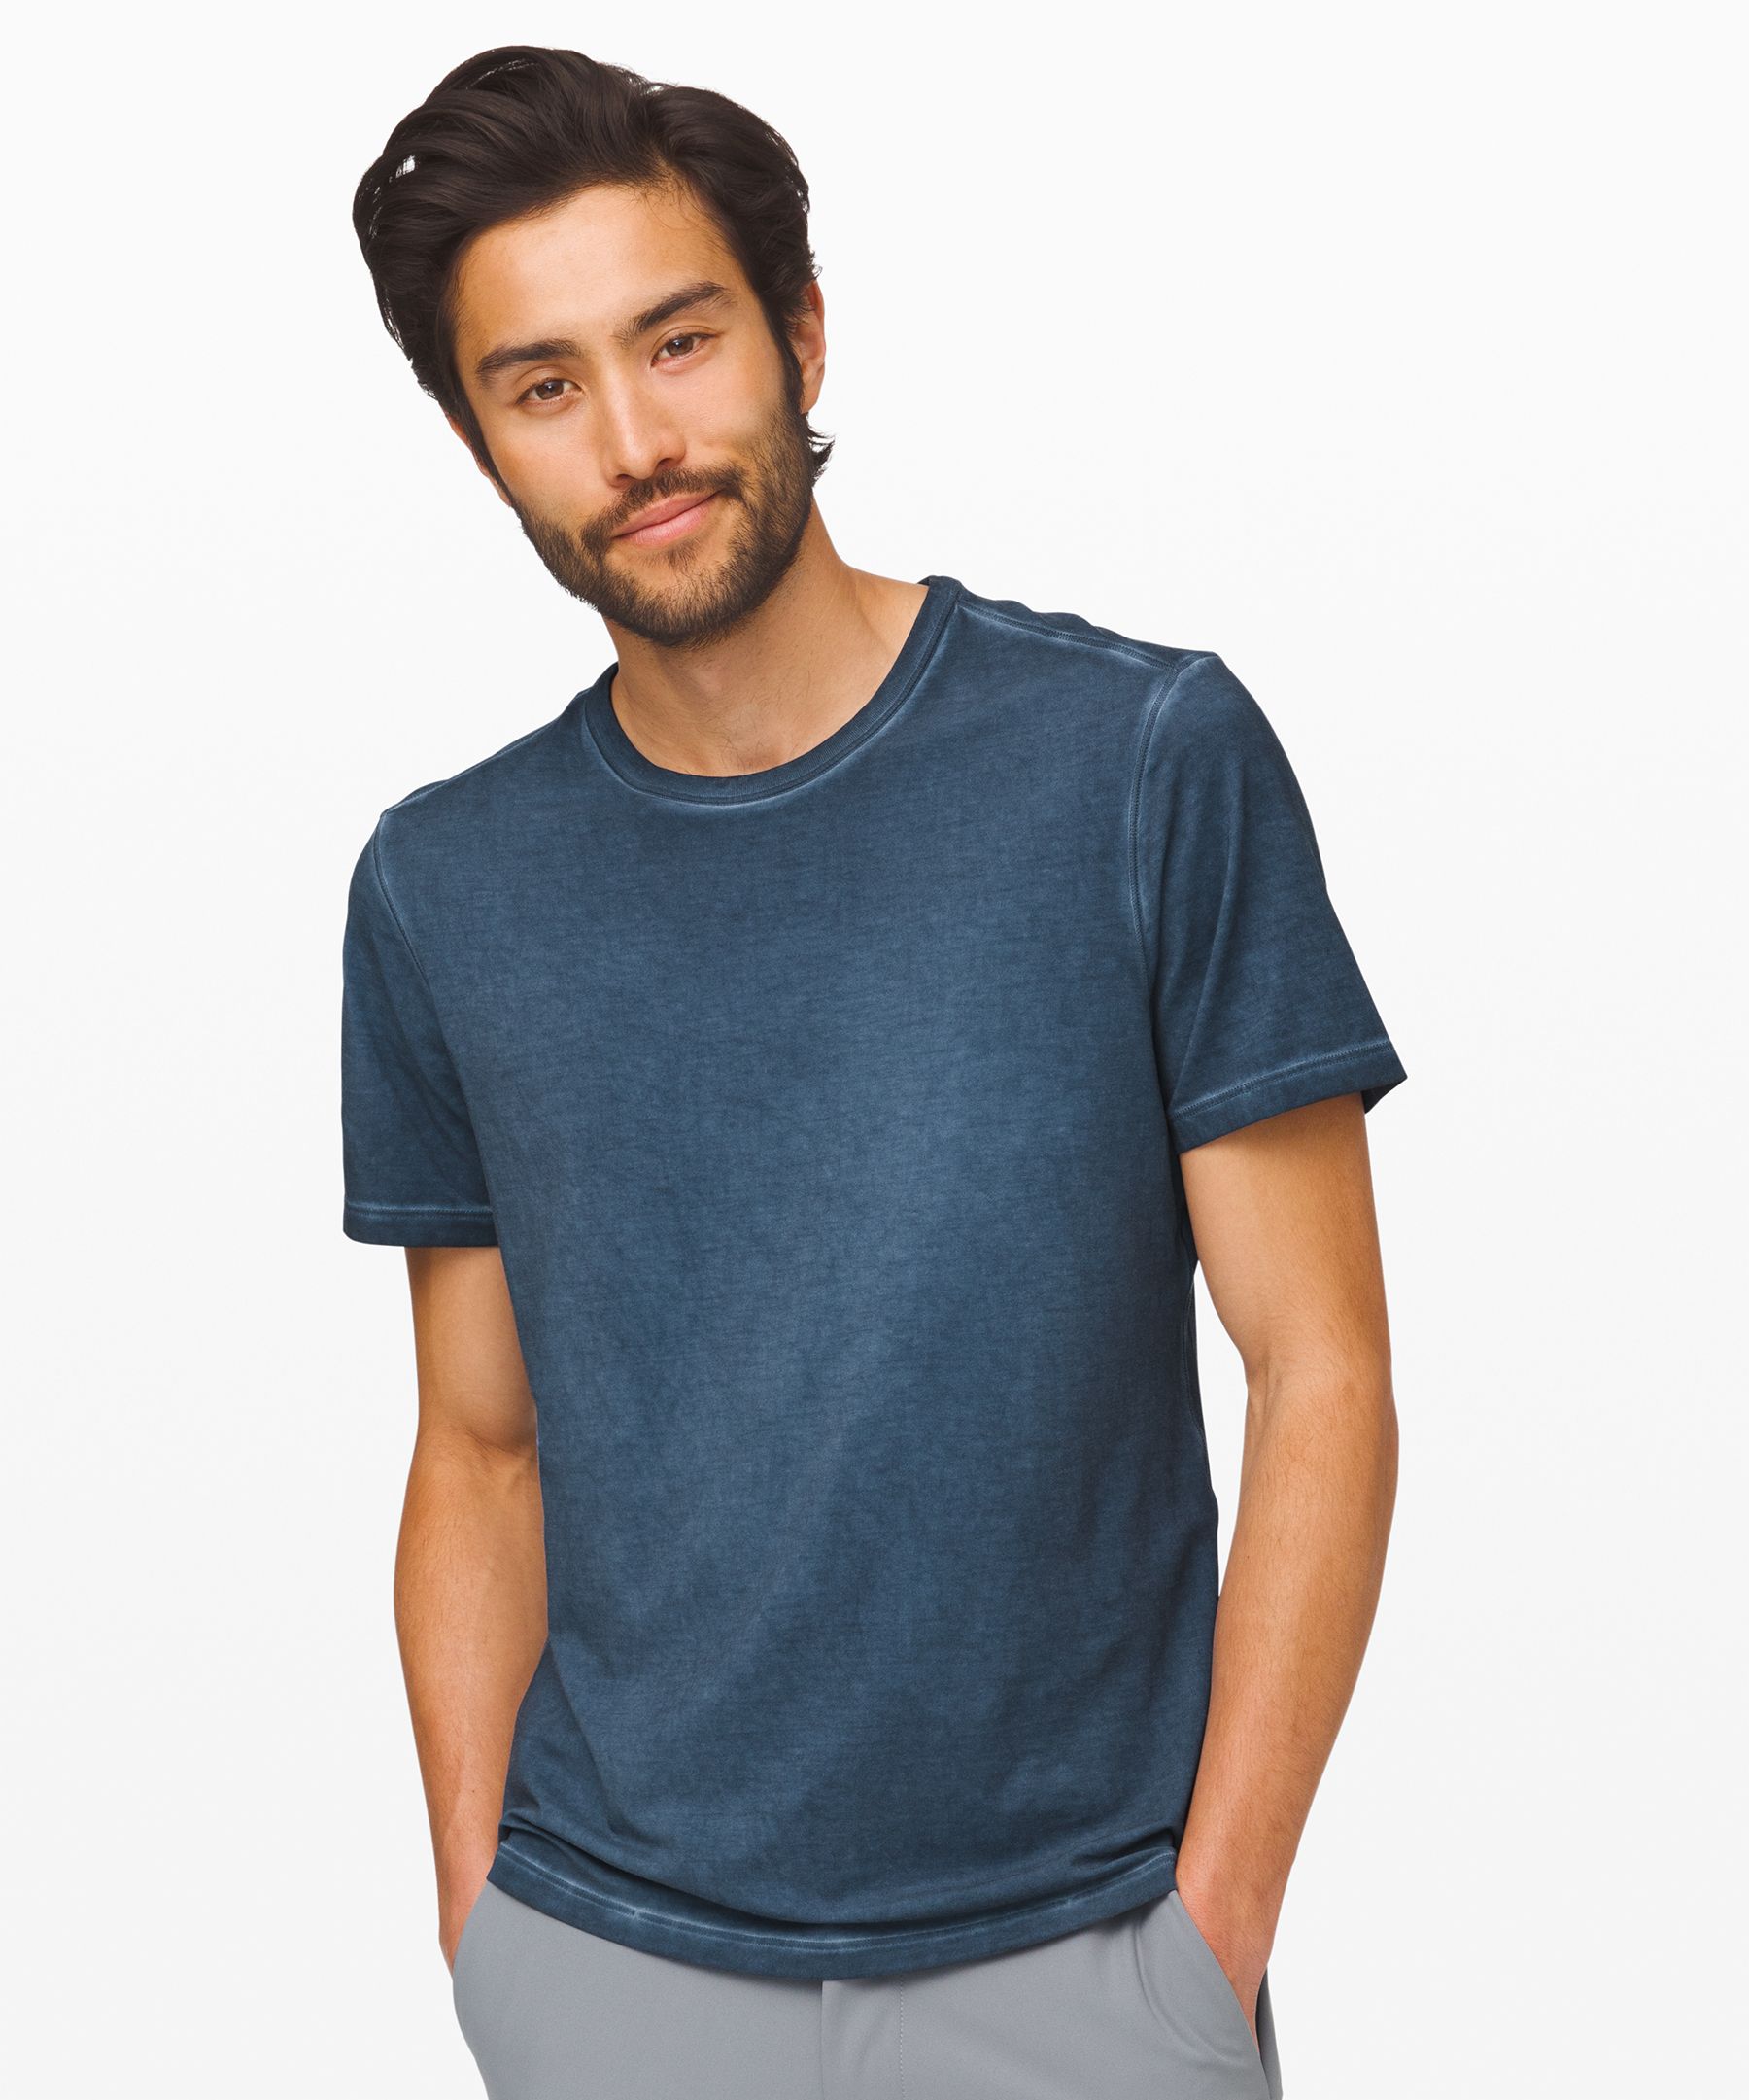 5 Year Basic Tee *Updated Fit | Men's 